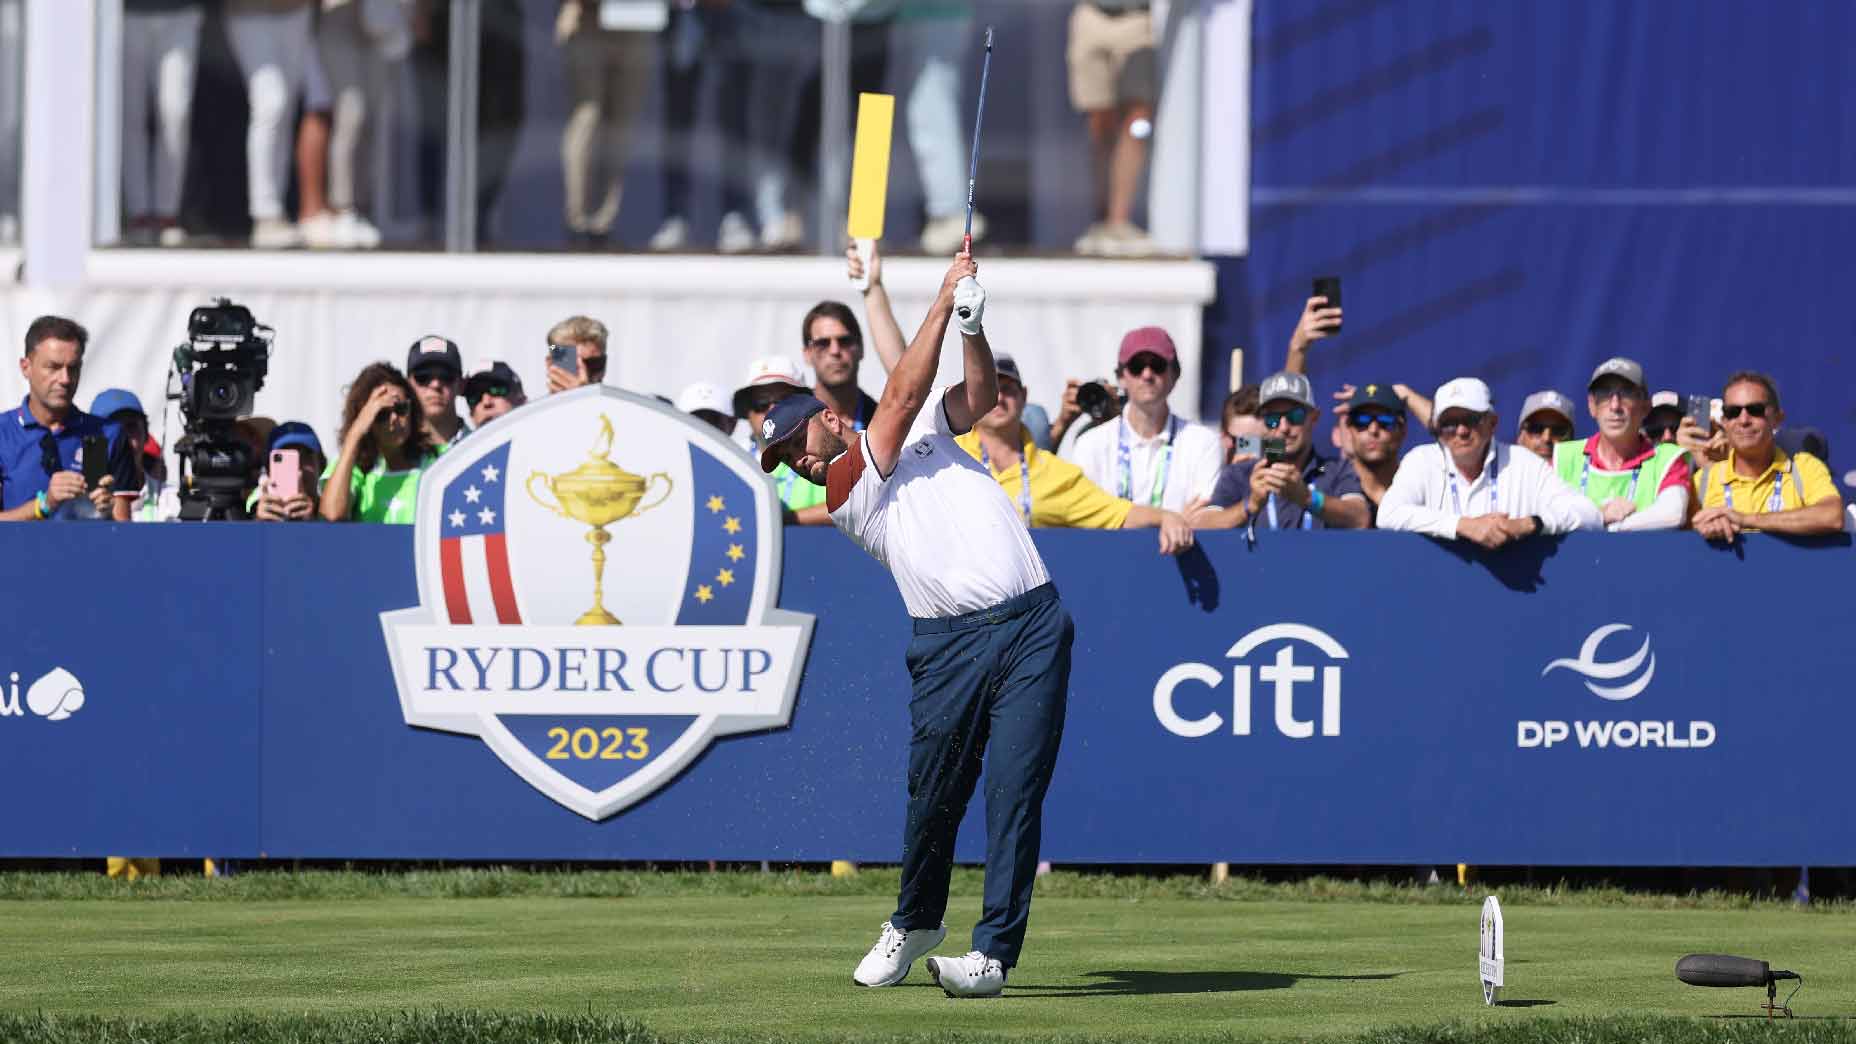 Dominant Europeans and American Challenge 2023 Ryder Cup Singles